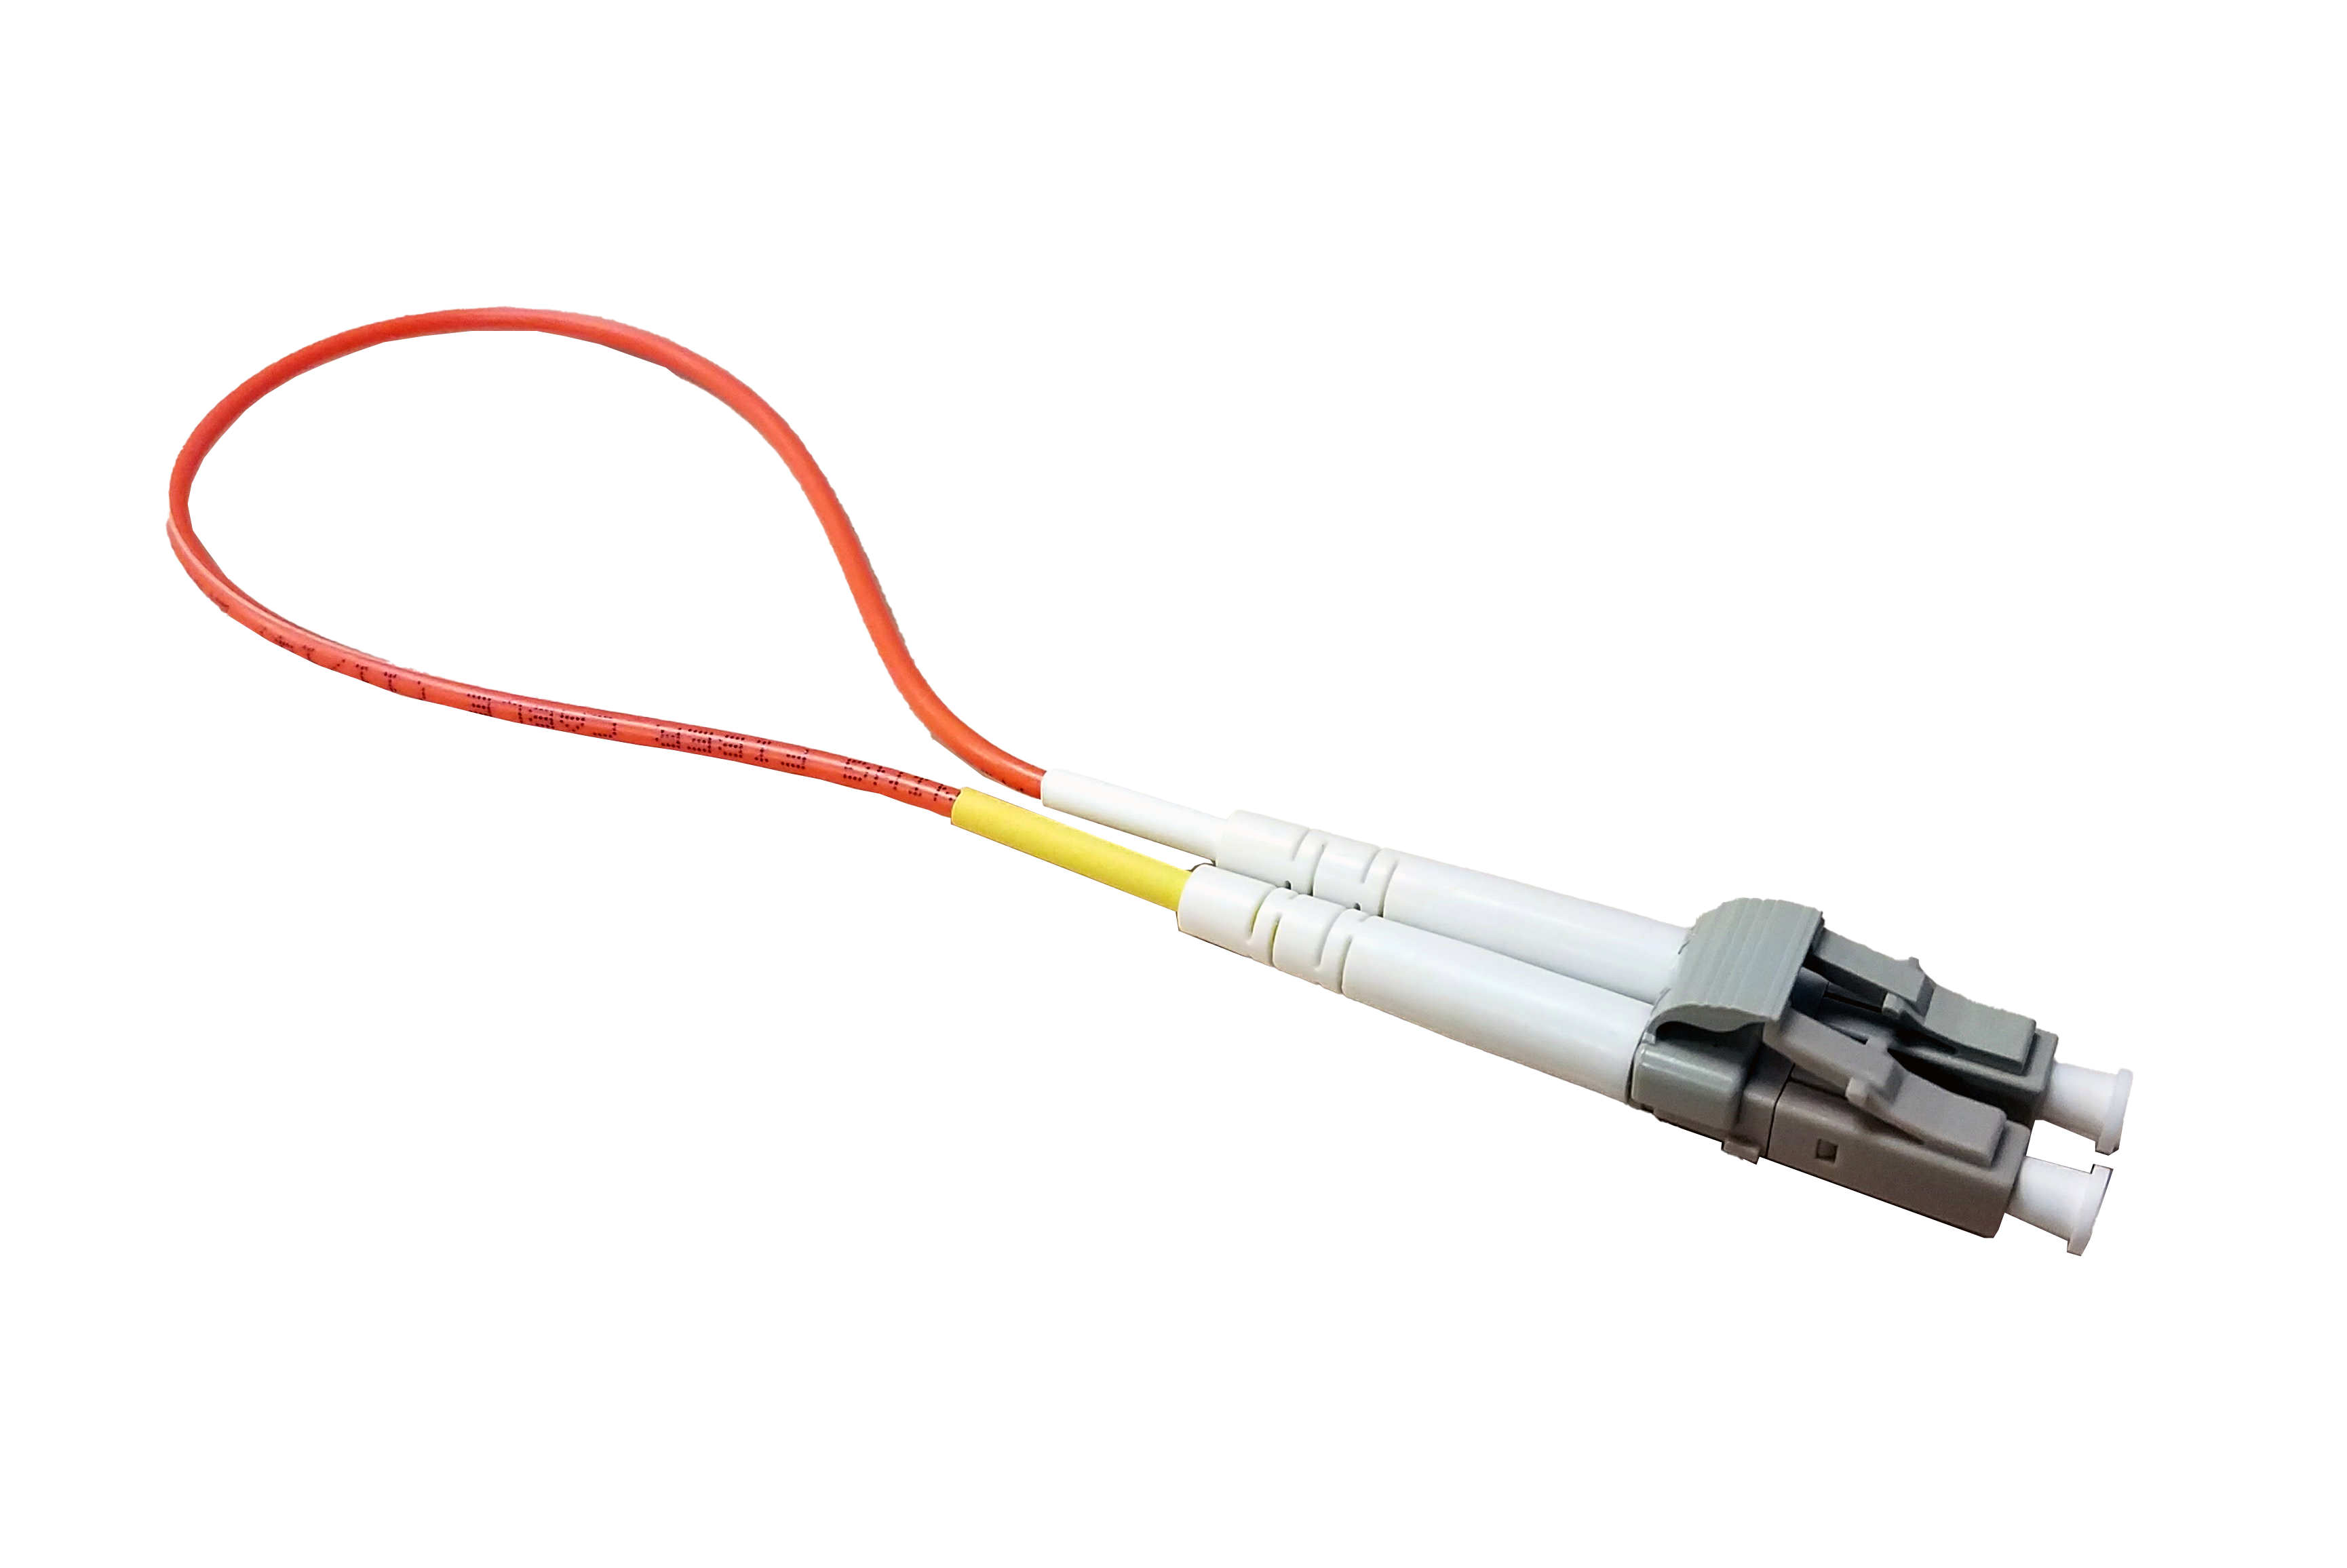 networking what is a loopback cable